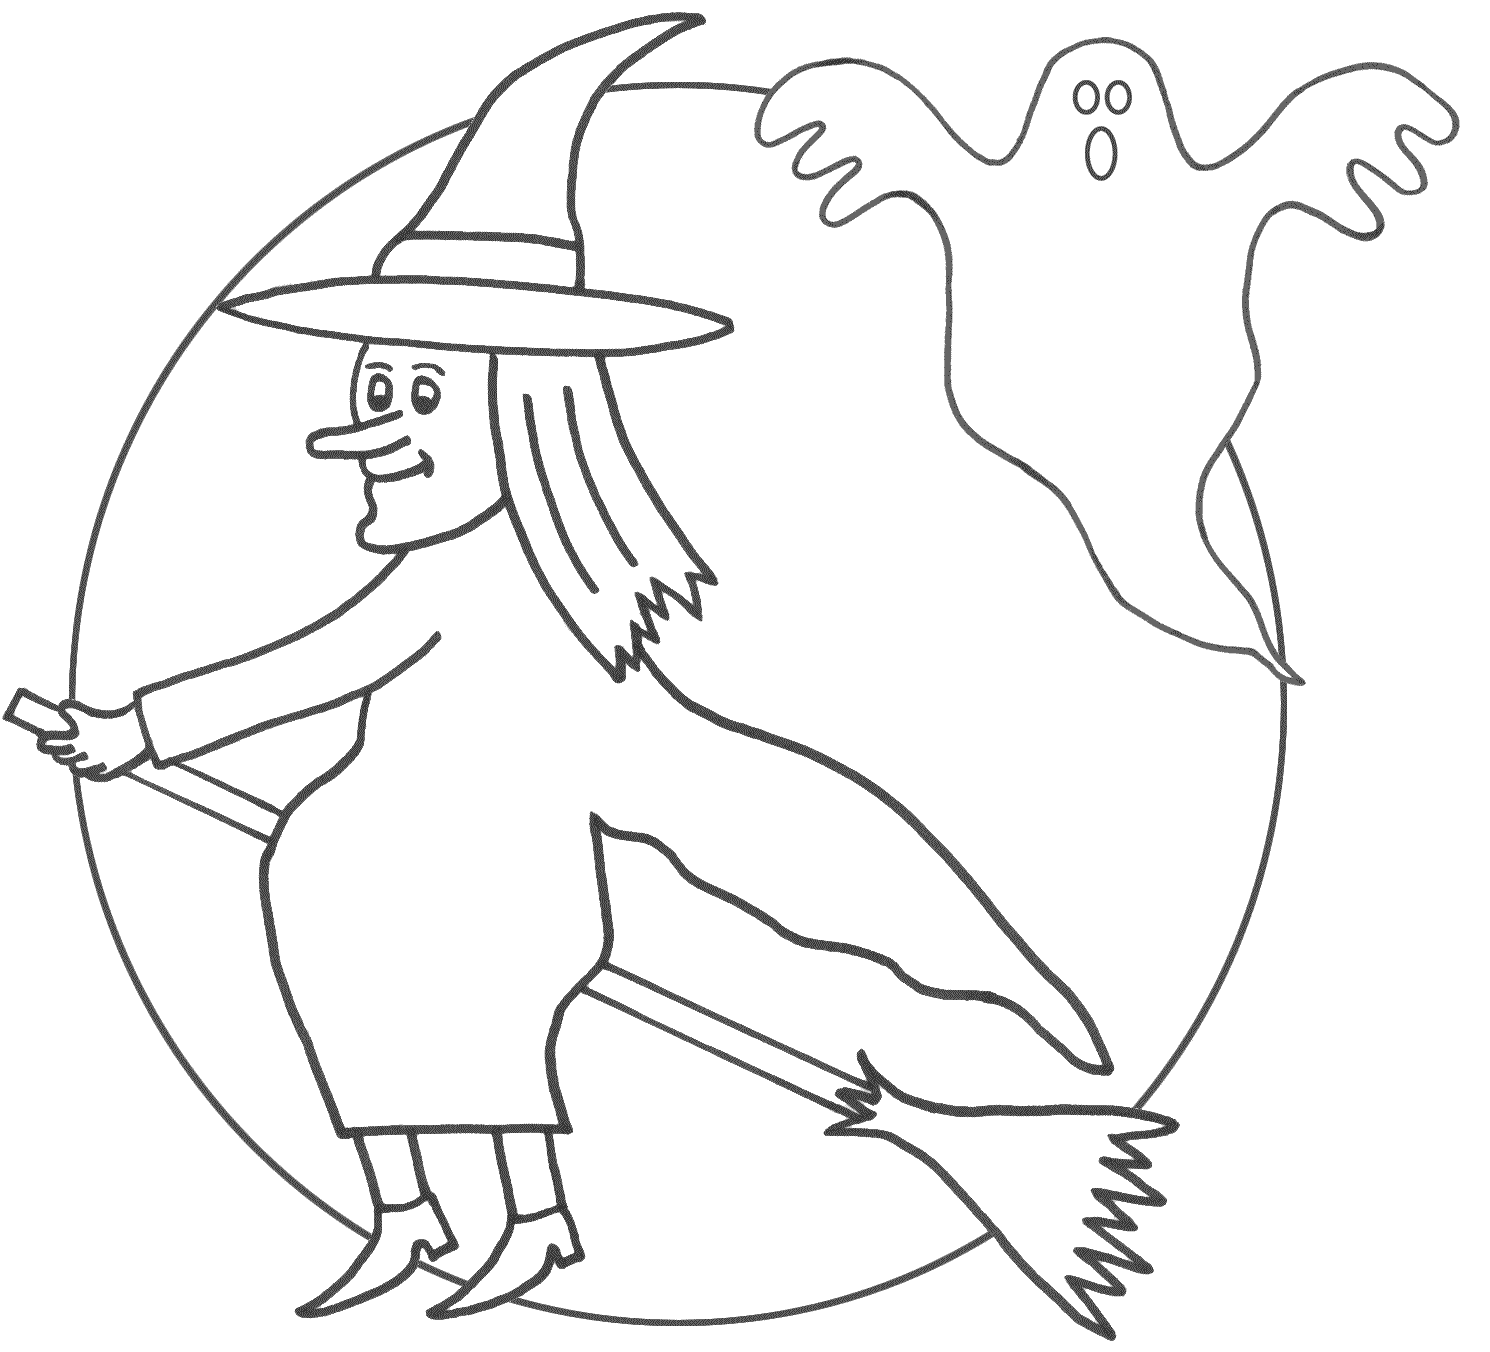 Witch coloring pages to download and print for free